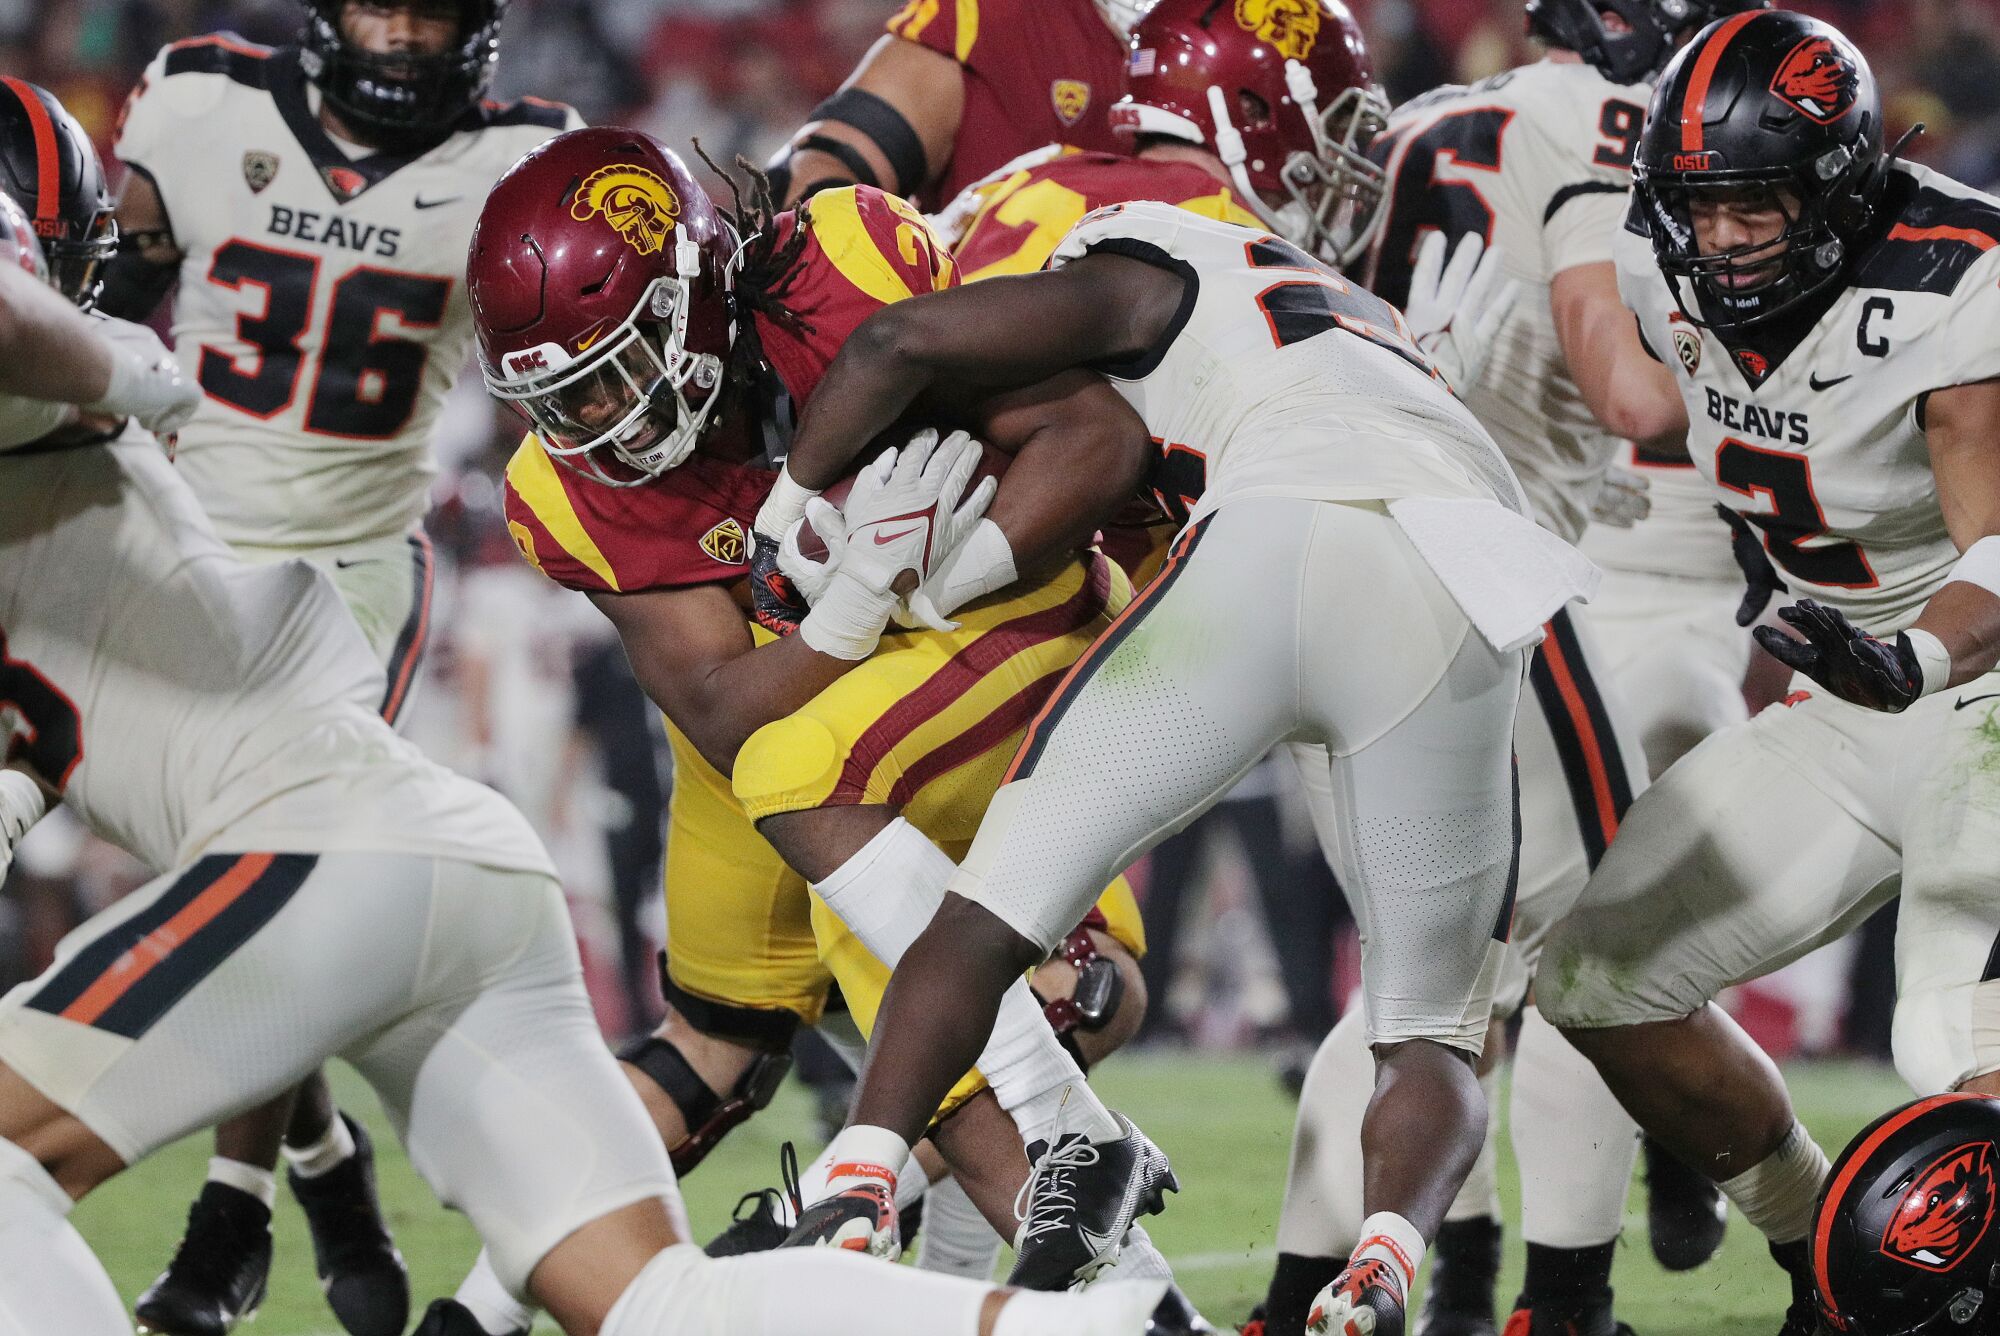 Oregon State defensive back Kitan Oladapo tries to strip the ball from USC running back Keaontay Ingram.